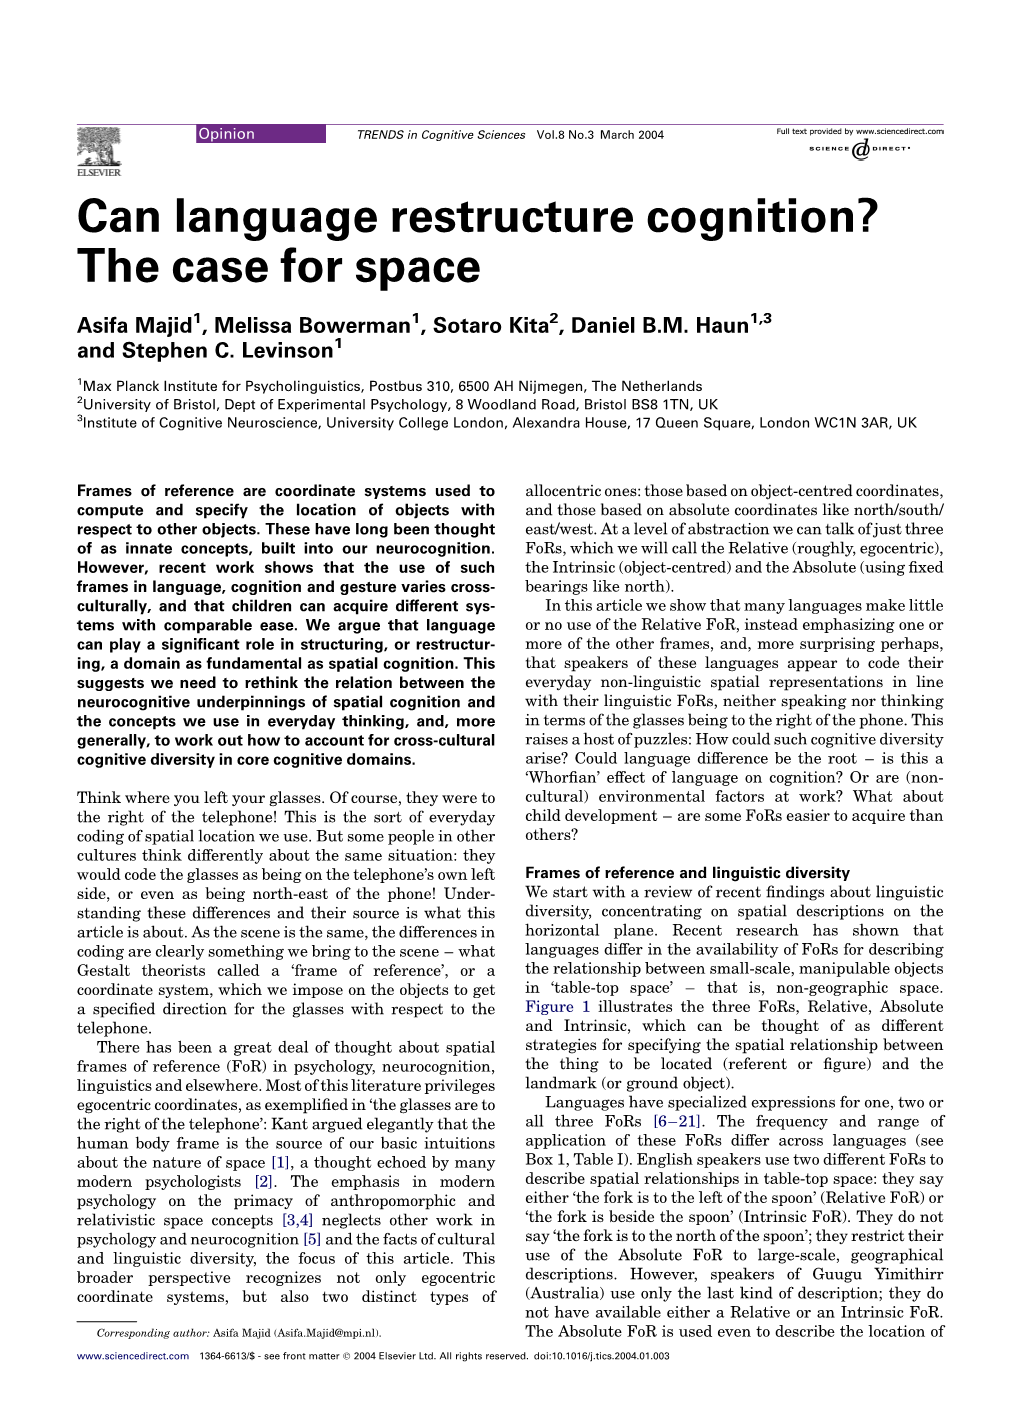 Can Language Restructure Cognition? the Case for Space